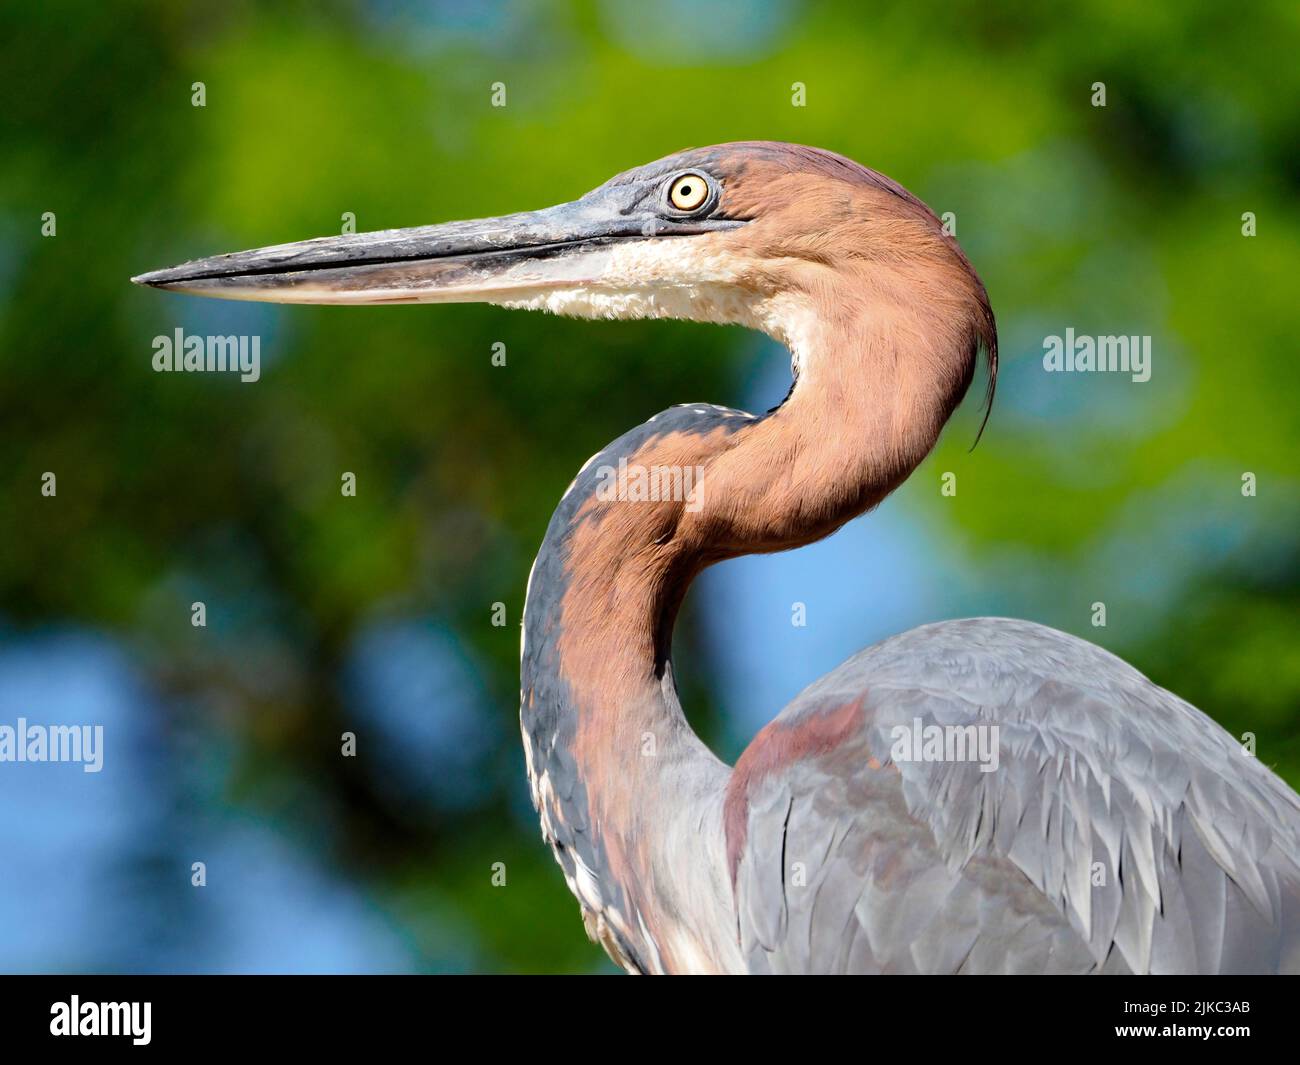 Portrait of Goliath heron (Ardea goliath), also known as the giant heron and seen from profile Stock Photo